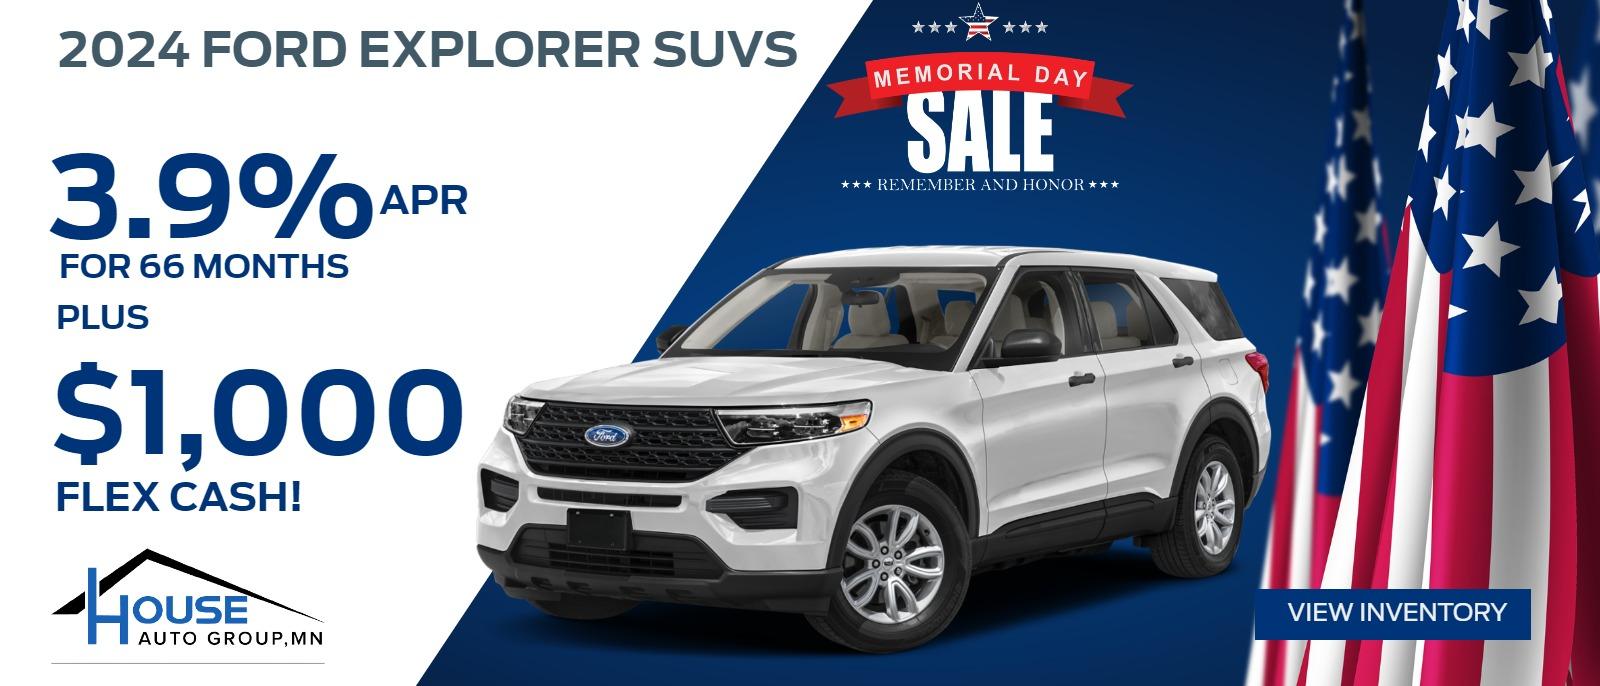 2024 Ford Explorer SUVs -- 3.9% APR / 66 Months + $1,000 Flex Cash! (for qualified buyers financing with Ford Credit, exp. 6/03)